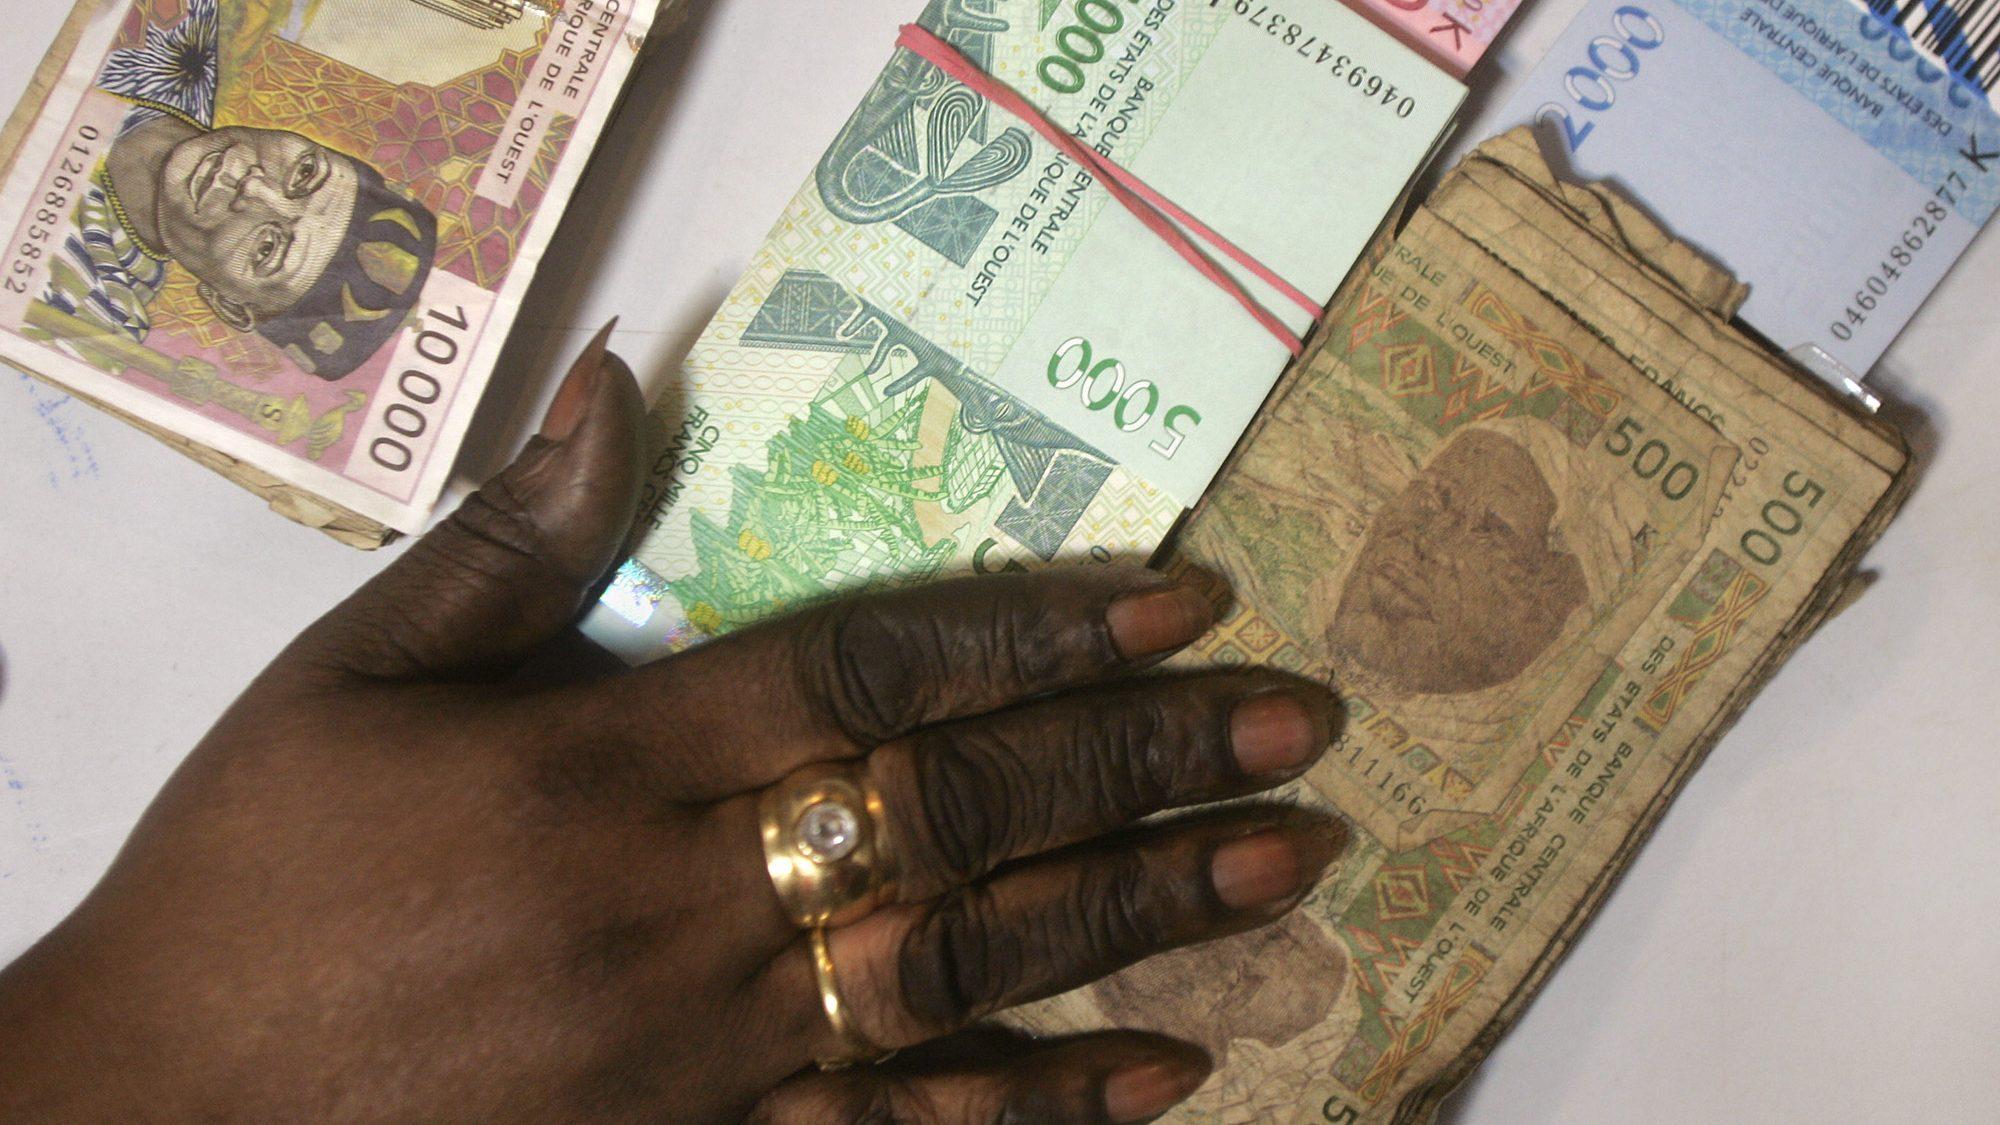 old and new banknotes of the CFA Franc